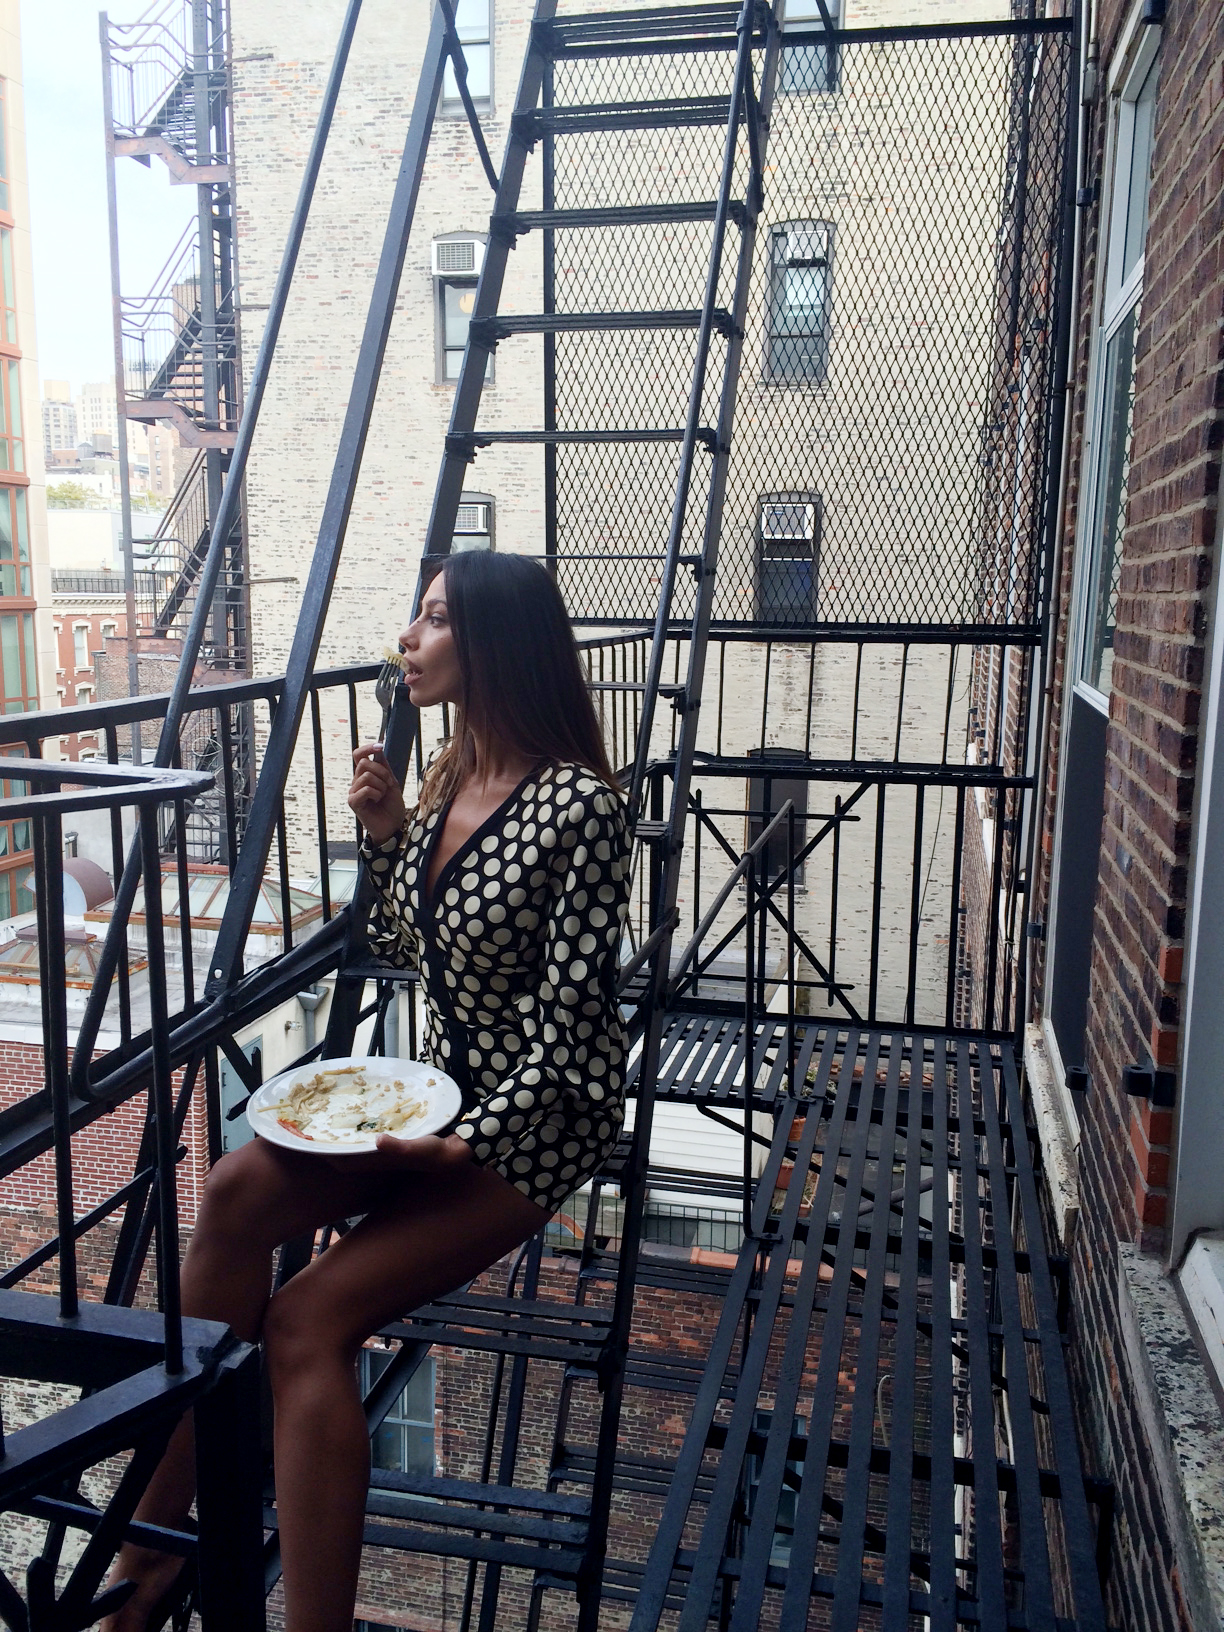 PHOTO: "Lunch on the stoop. Only in New York!"